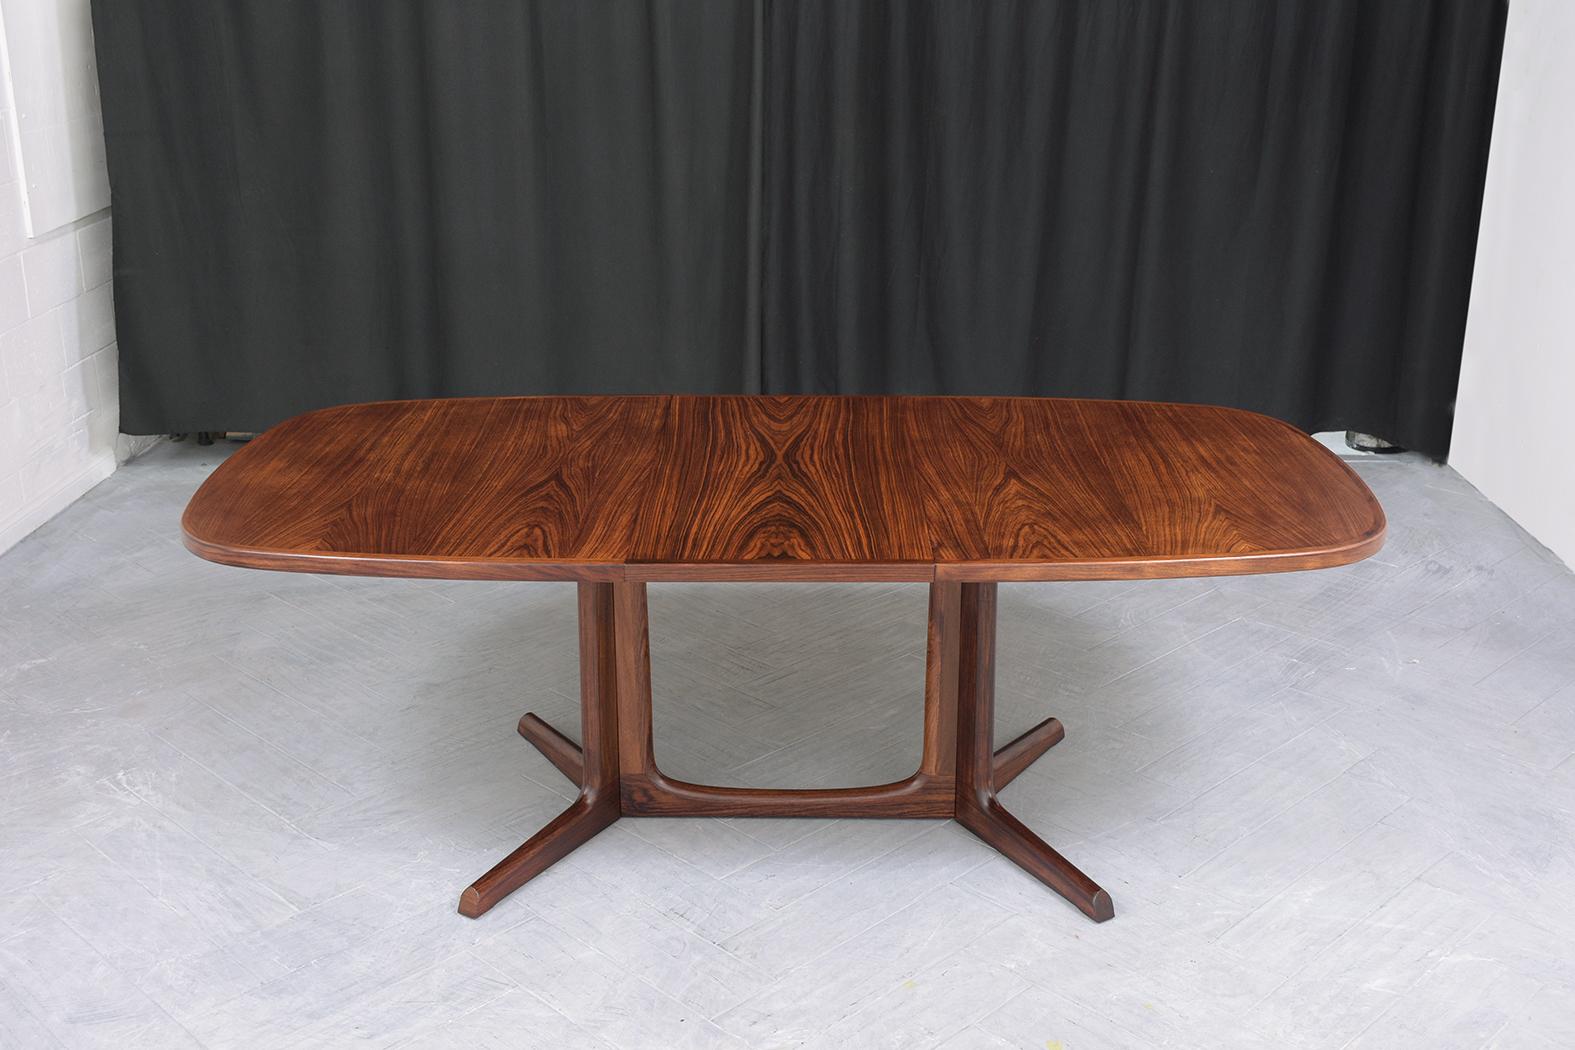 This extraordinary vintage mid-century dining table is in excellent condition and is hand-crafted out of beautiful rosewood and professionally restored by our expert craftsman team. This 1960s danish dining room table features eye-catching mahogany